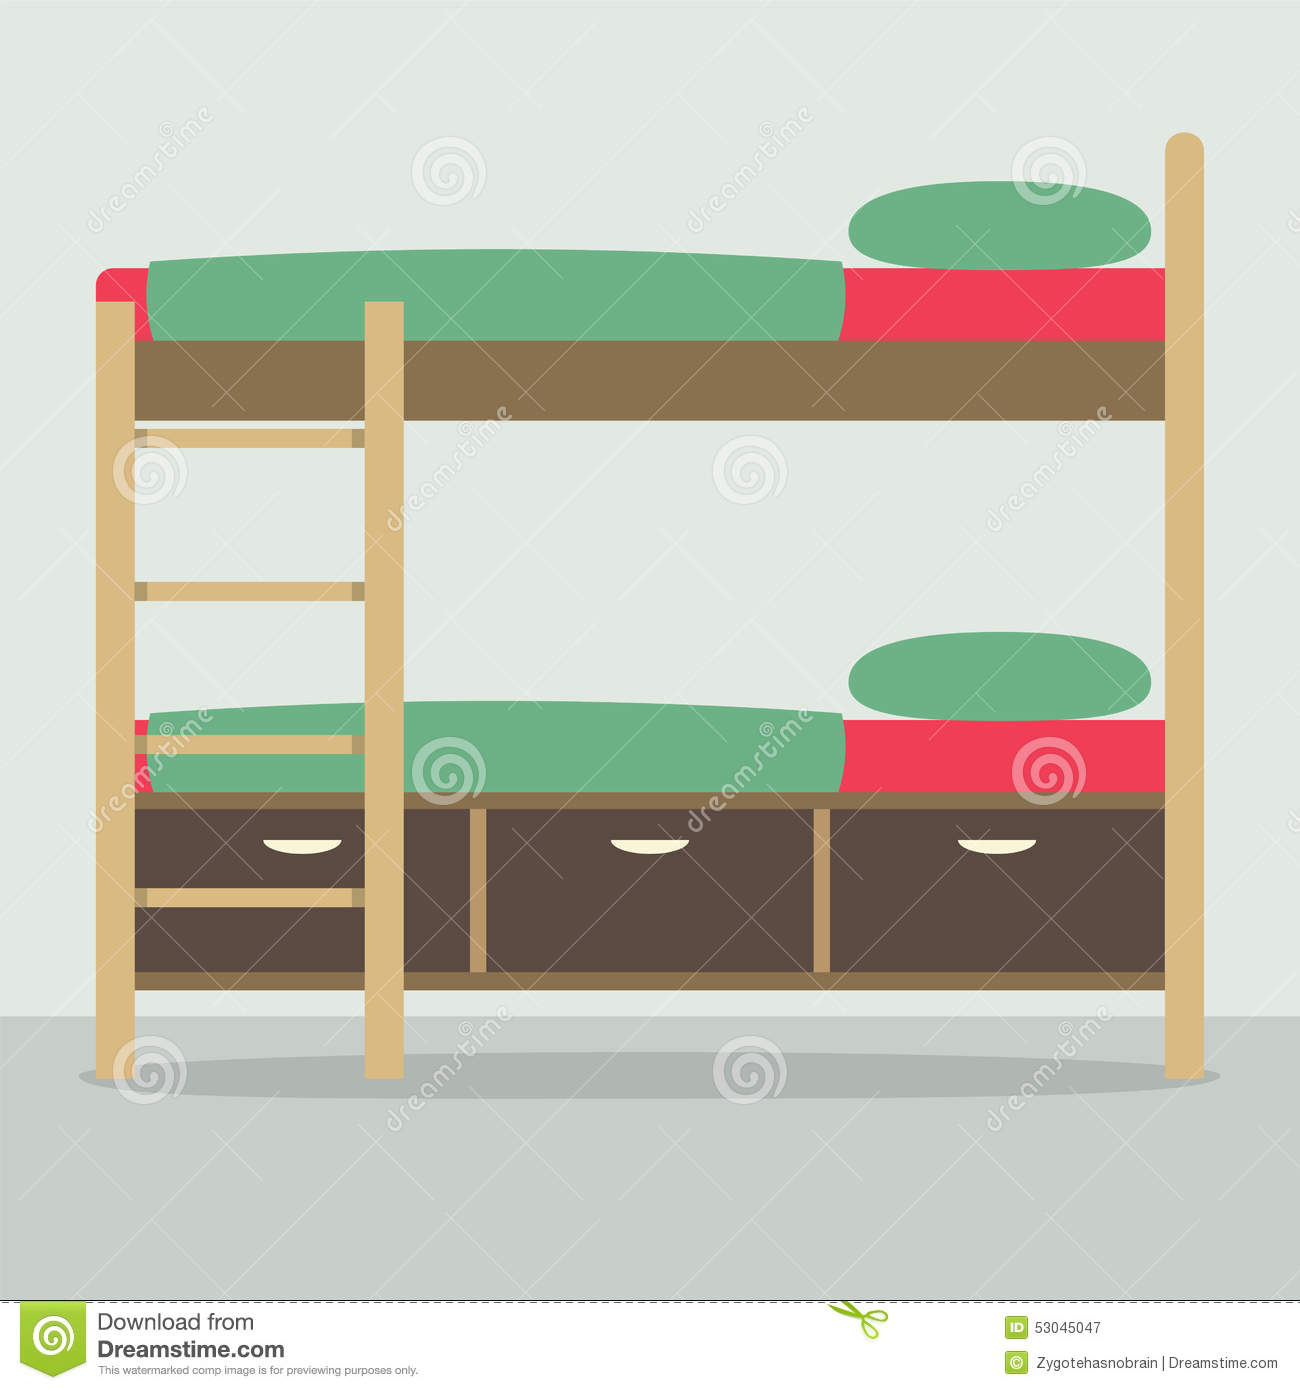 Side View Of Bunk Bed On Floor Stock Vector   Image  53045047